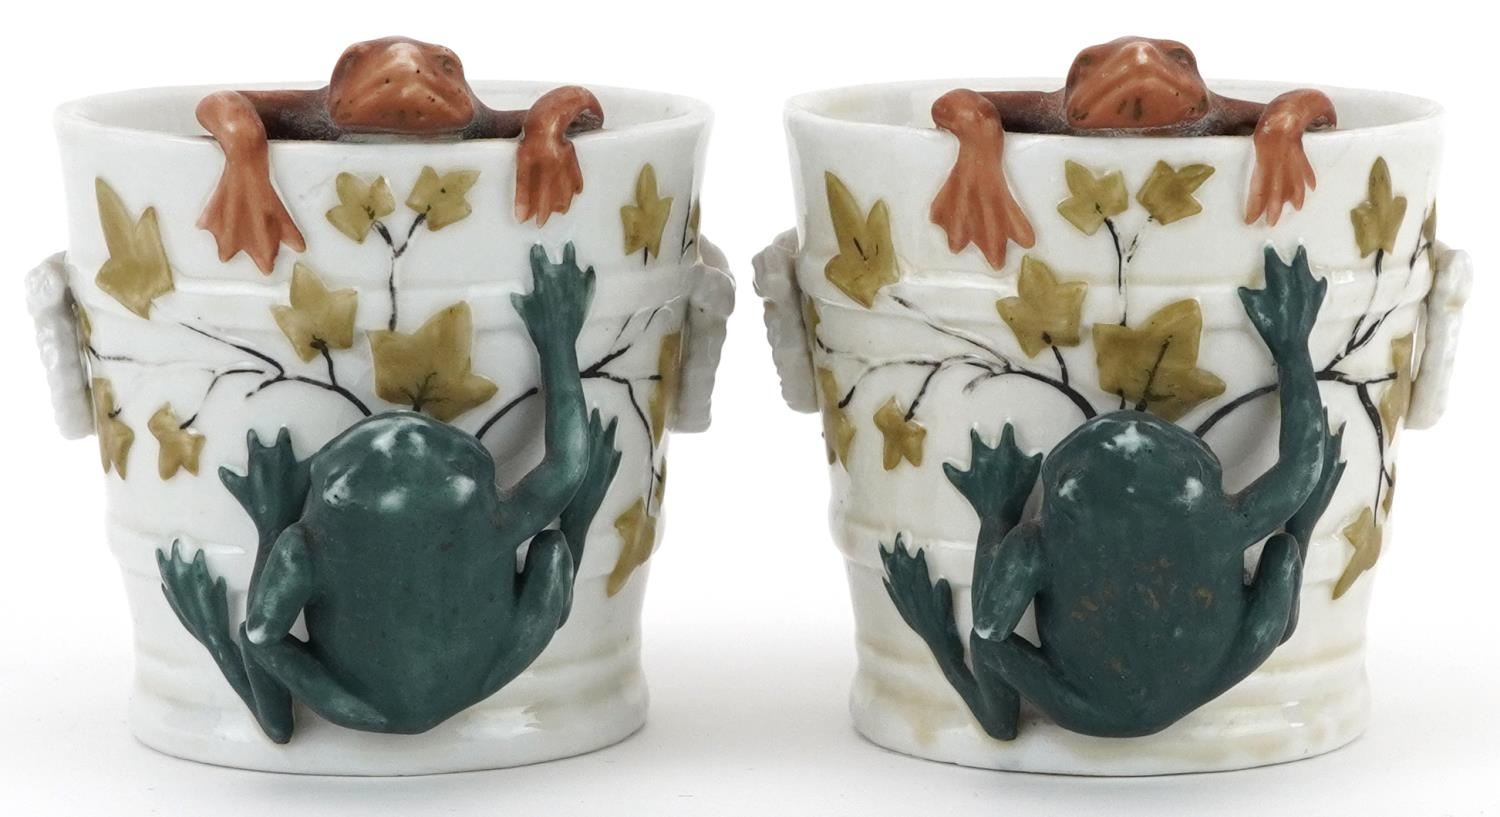 Pair of 19th century continental porcelain comical cache pots in the form of buckets mounted with